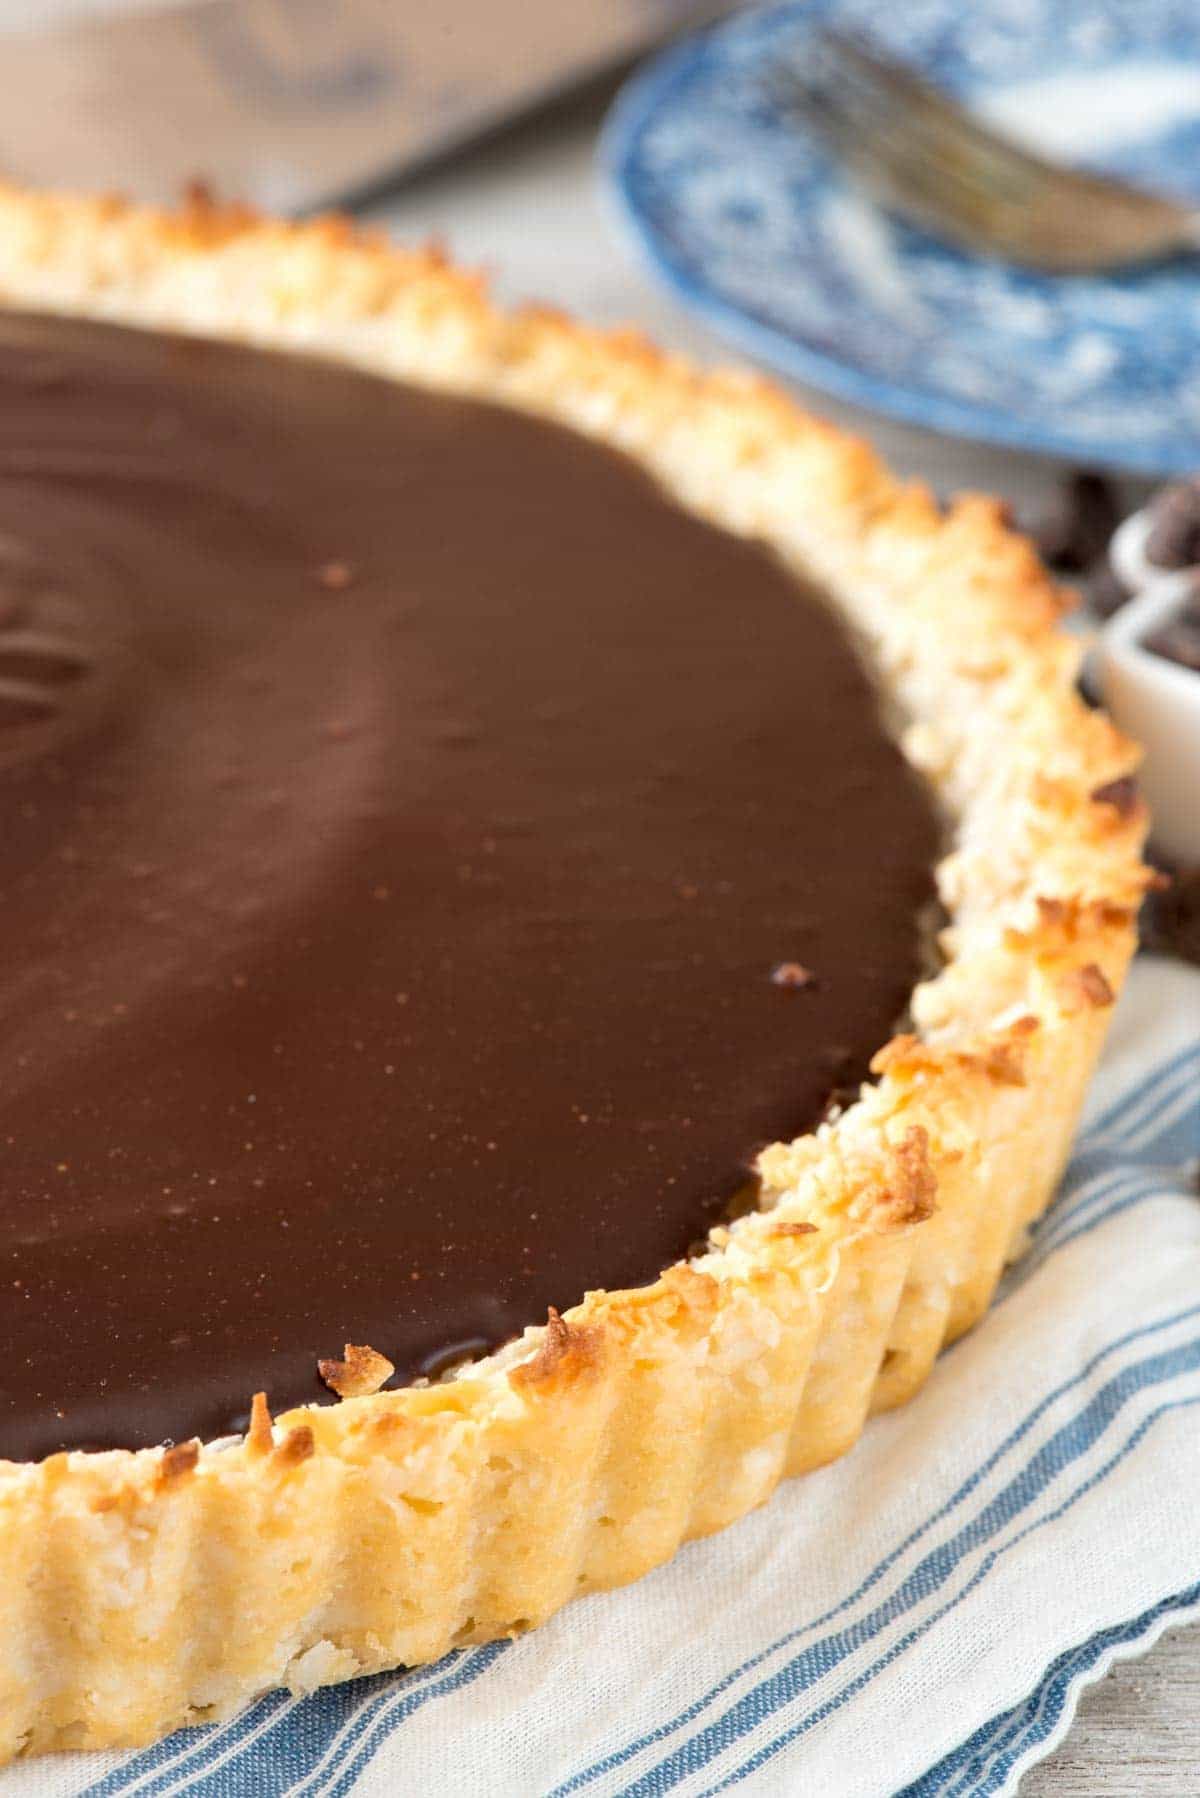 Chocolate Macaroon Pie - this easy macaroon recipe is baked into a pie crust and then filled with a rich chocolate ganache filling! It's the perfect mixture of decadent chocolate and coconut - this pie is always a hit!